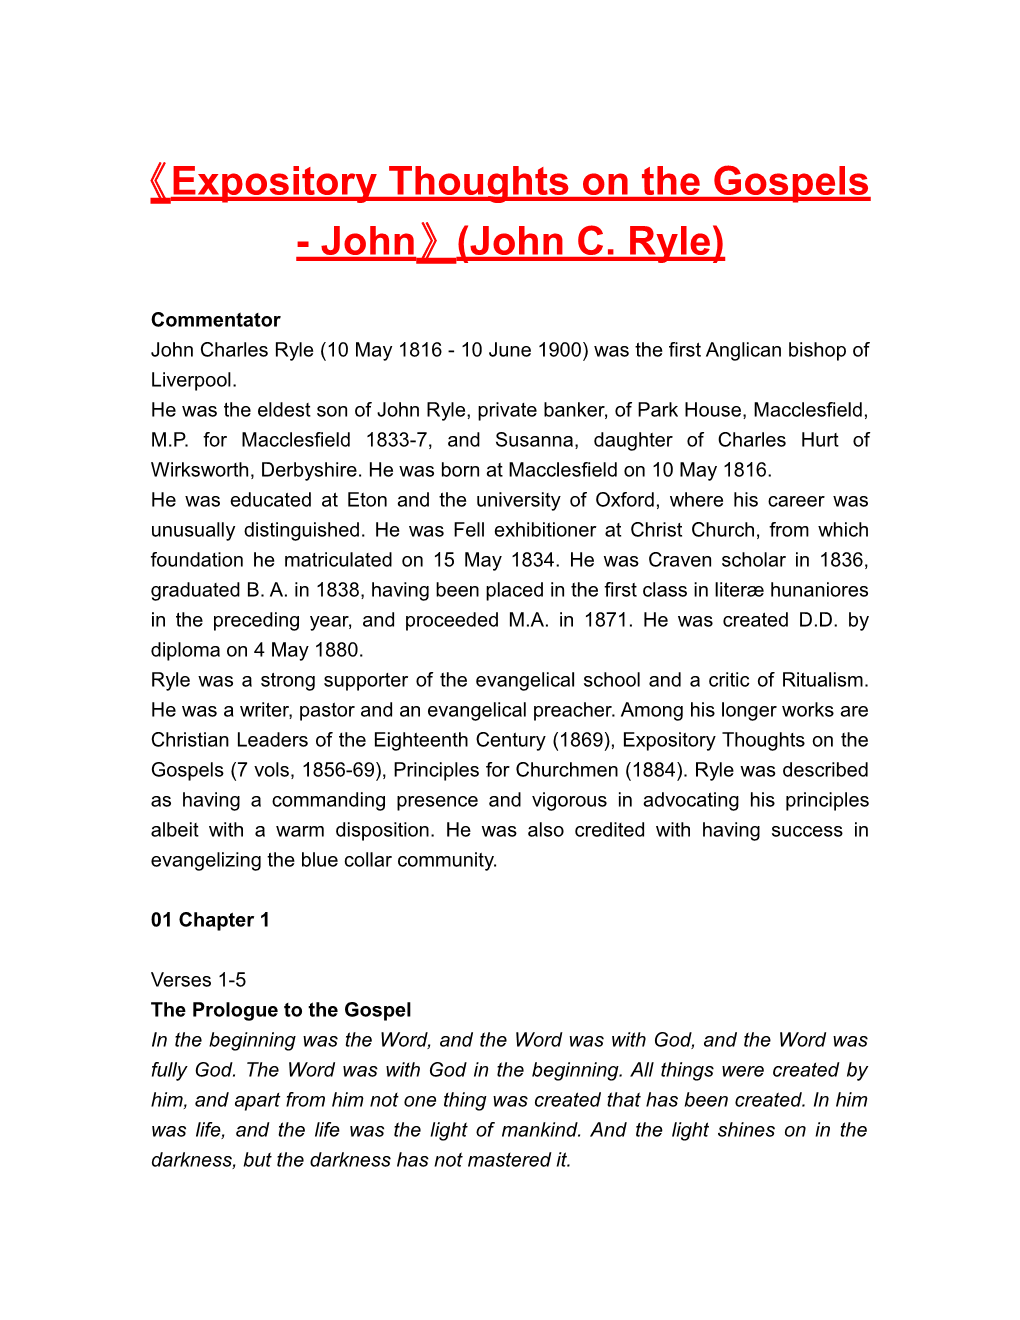 Expository Thoughts on the Gospels - John (John C. Ryle)